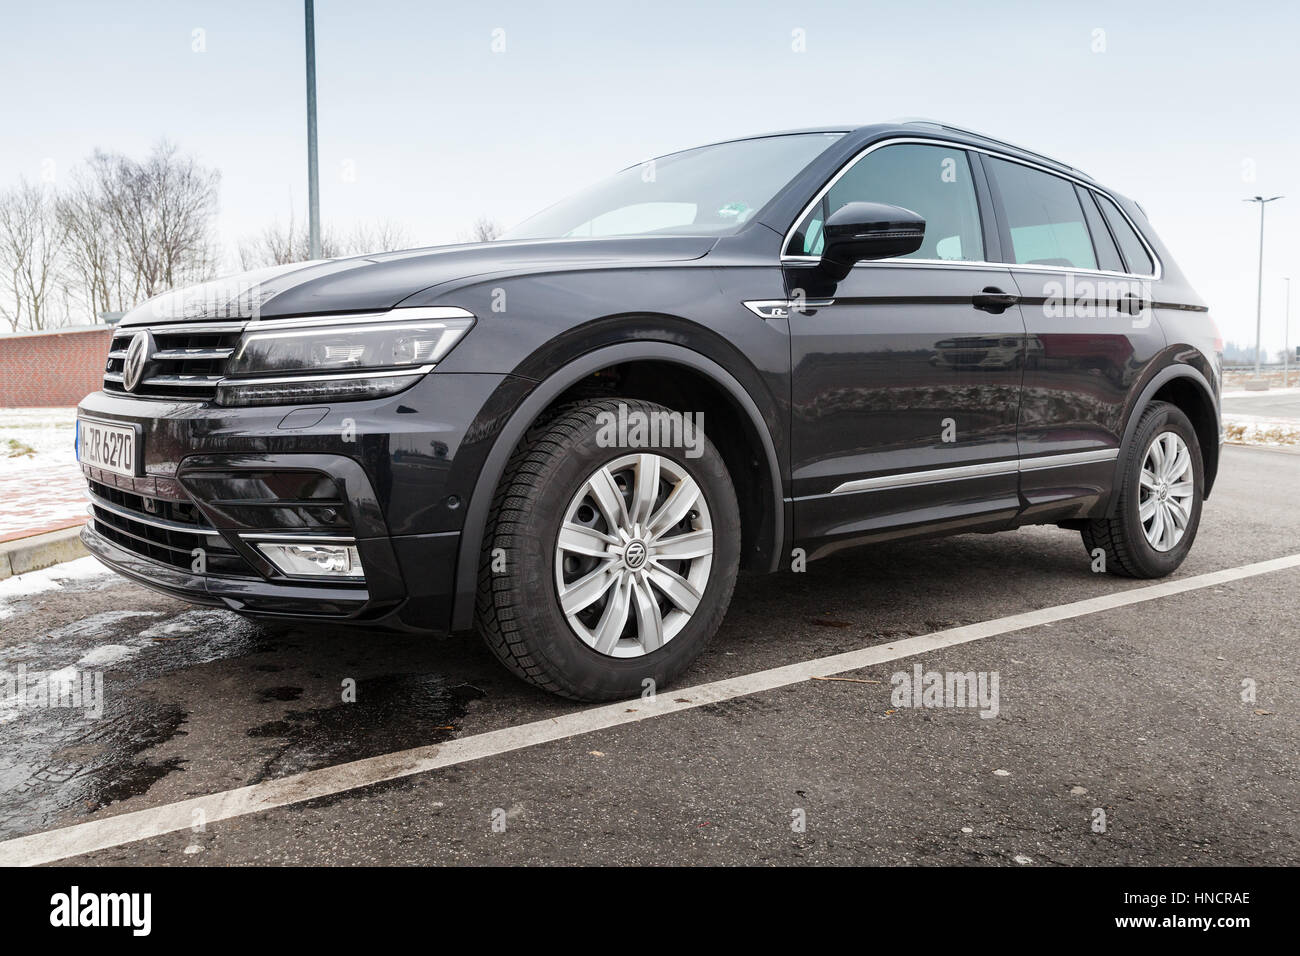 Hamburg, Germany - February 10, 2017: Outdoor photo of second generation Volkswagen Tiguan, 4x4 R-Line. Black compact crossover vehicle CUV manufactur Stock Photo